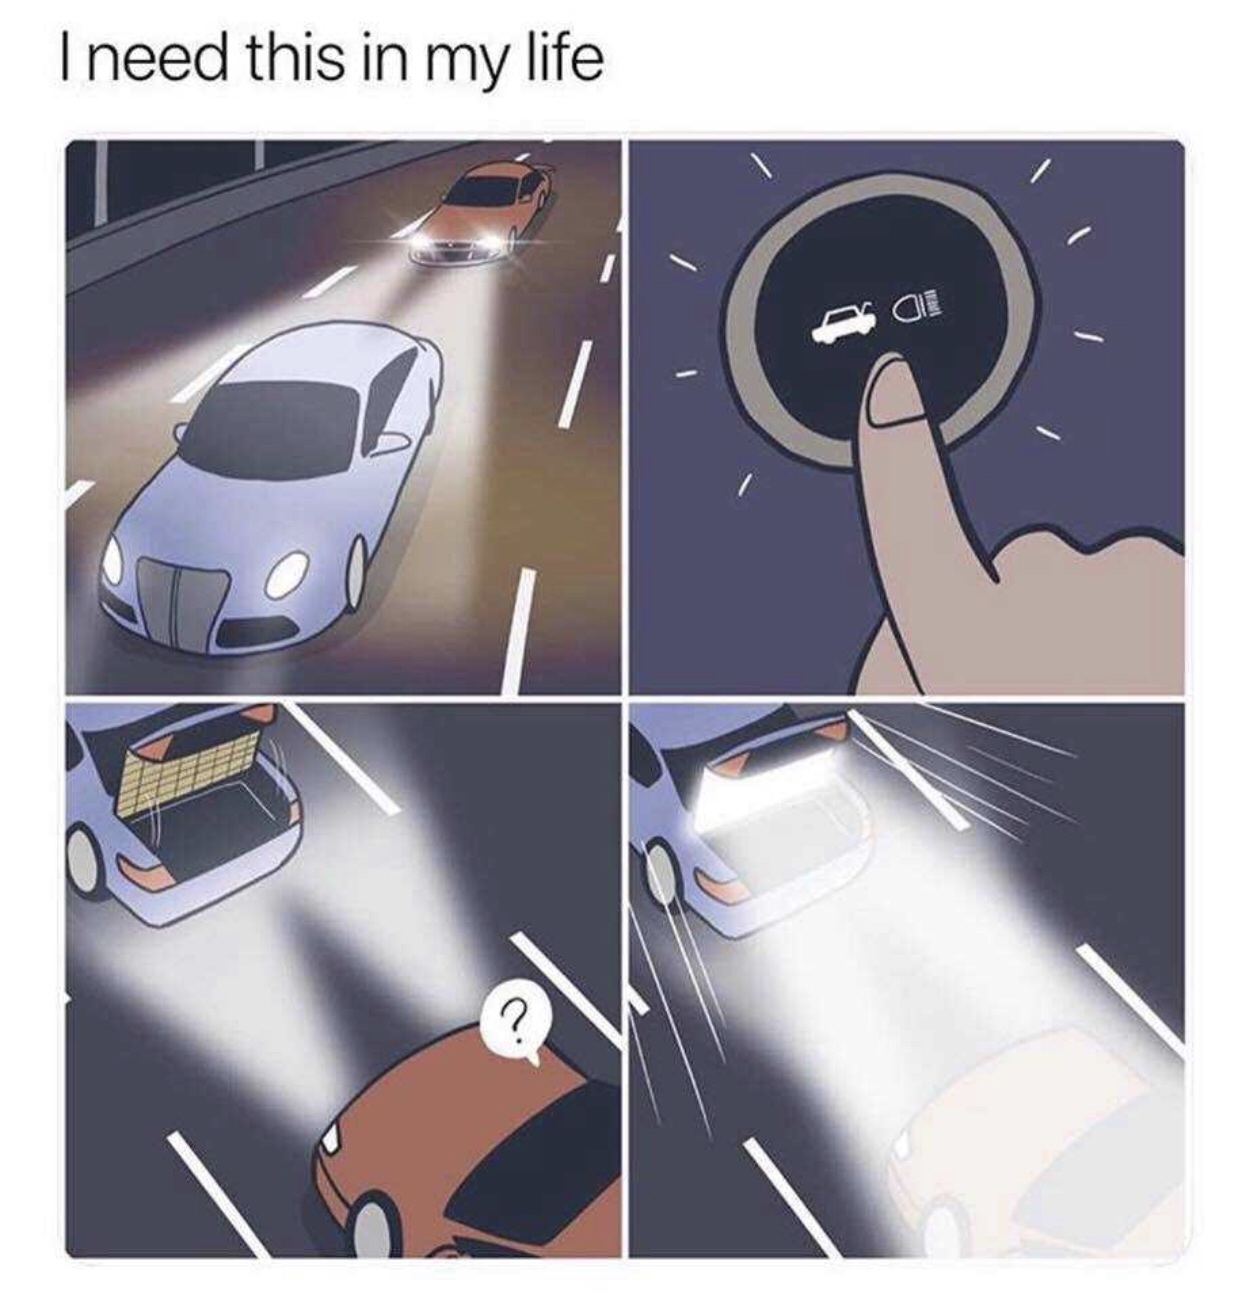 high beam car meme - I need this in my life